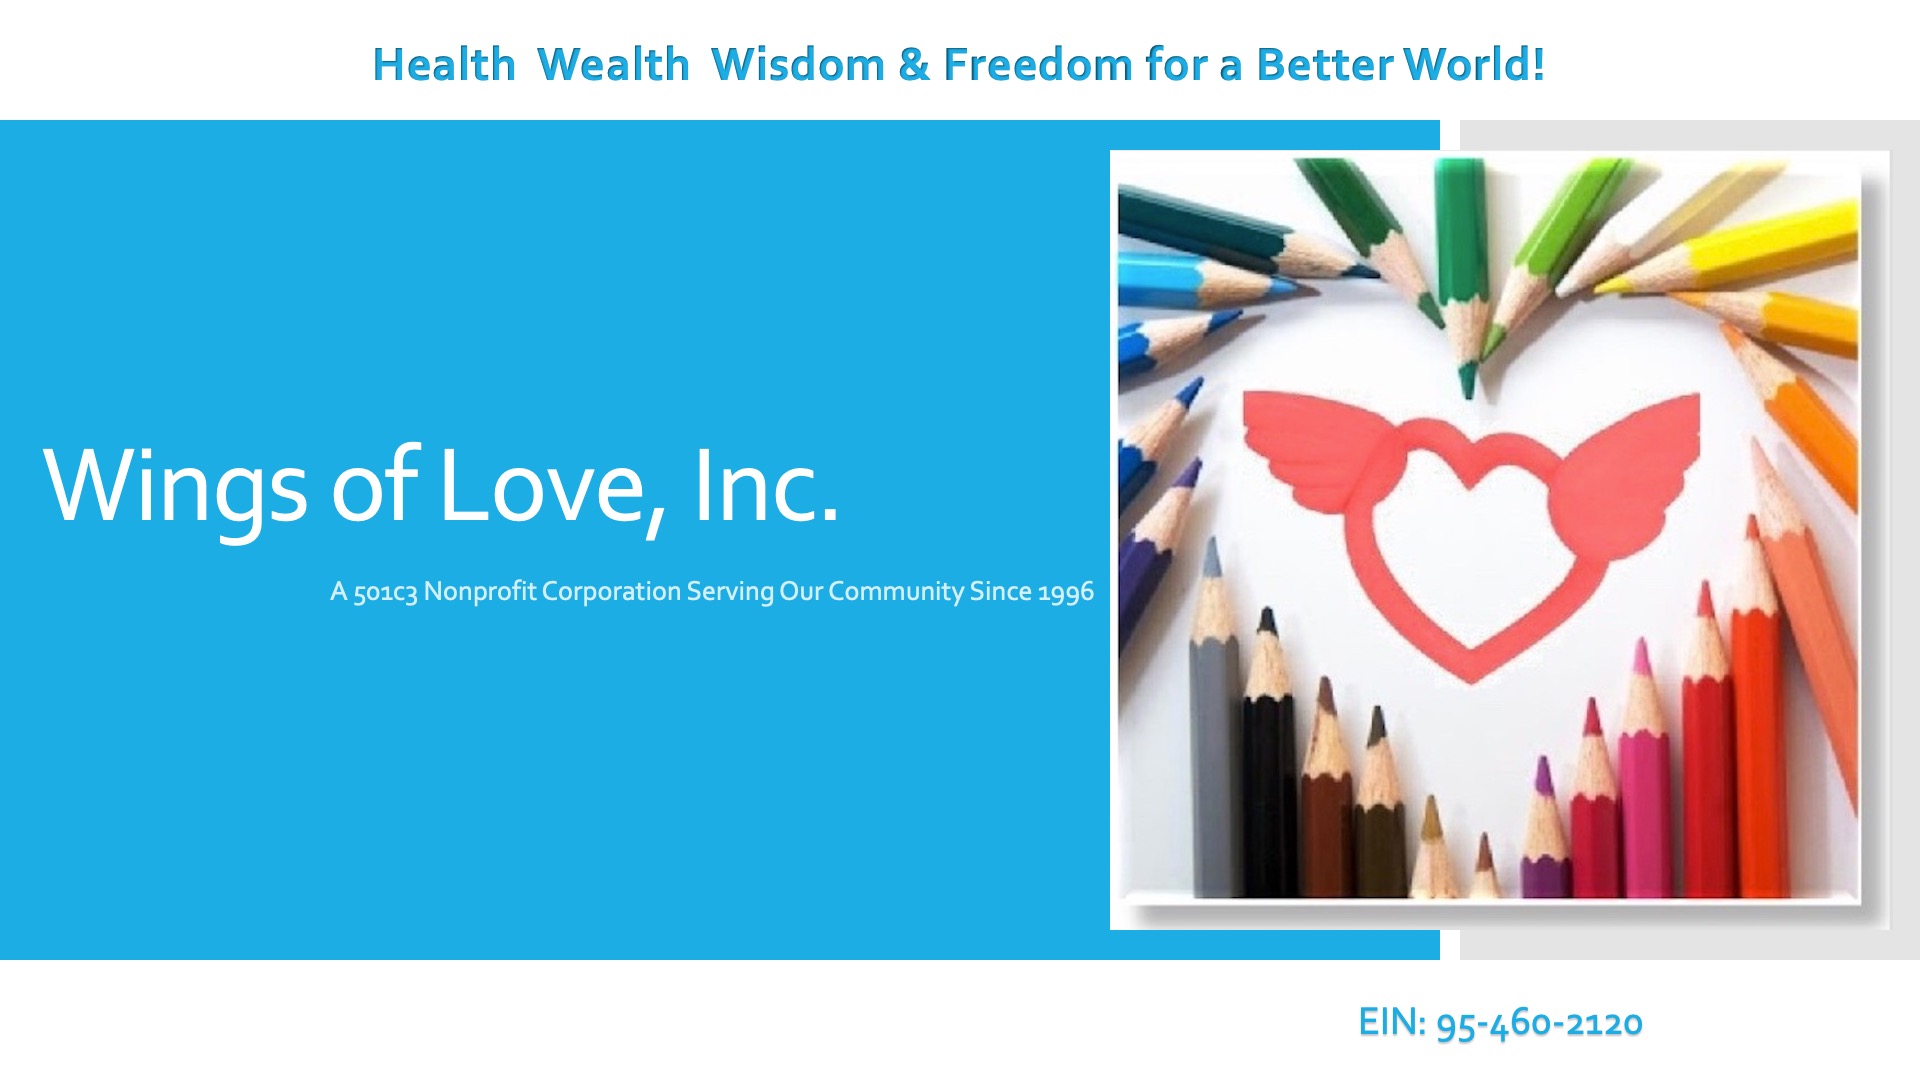 Wings of Love, Inc. A 501c3 Nonprofit Corporation